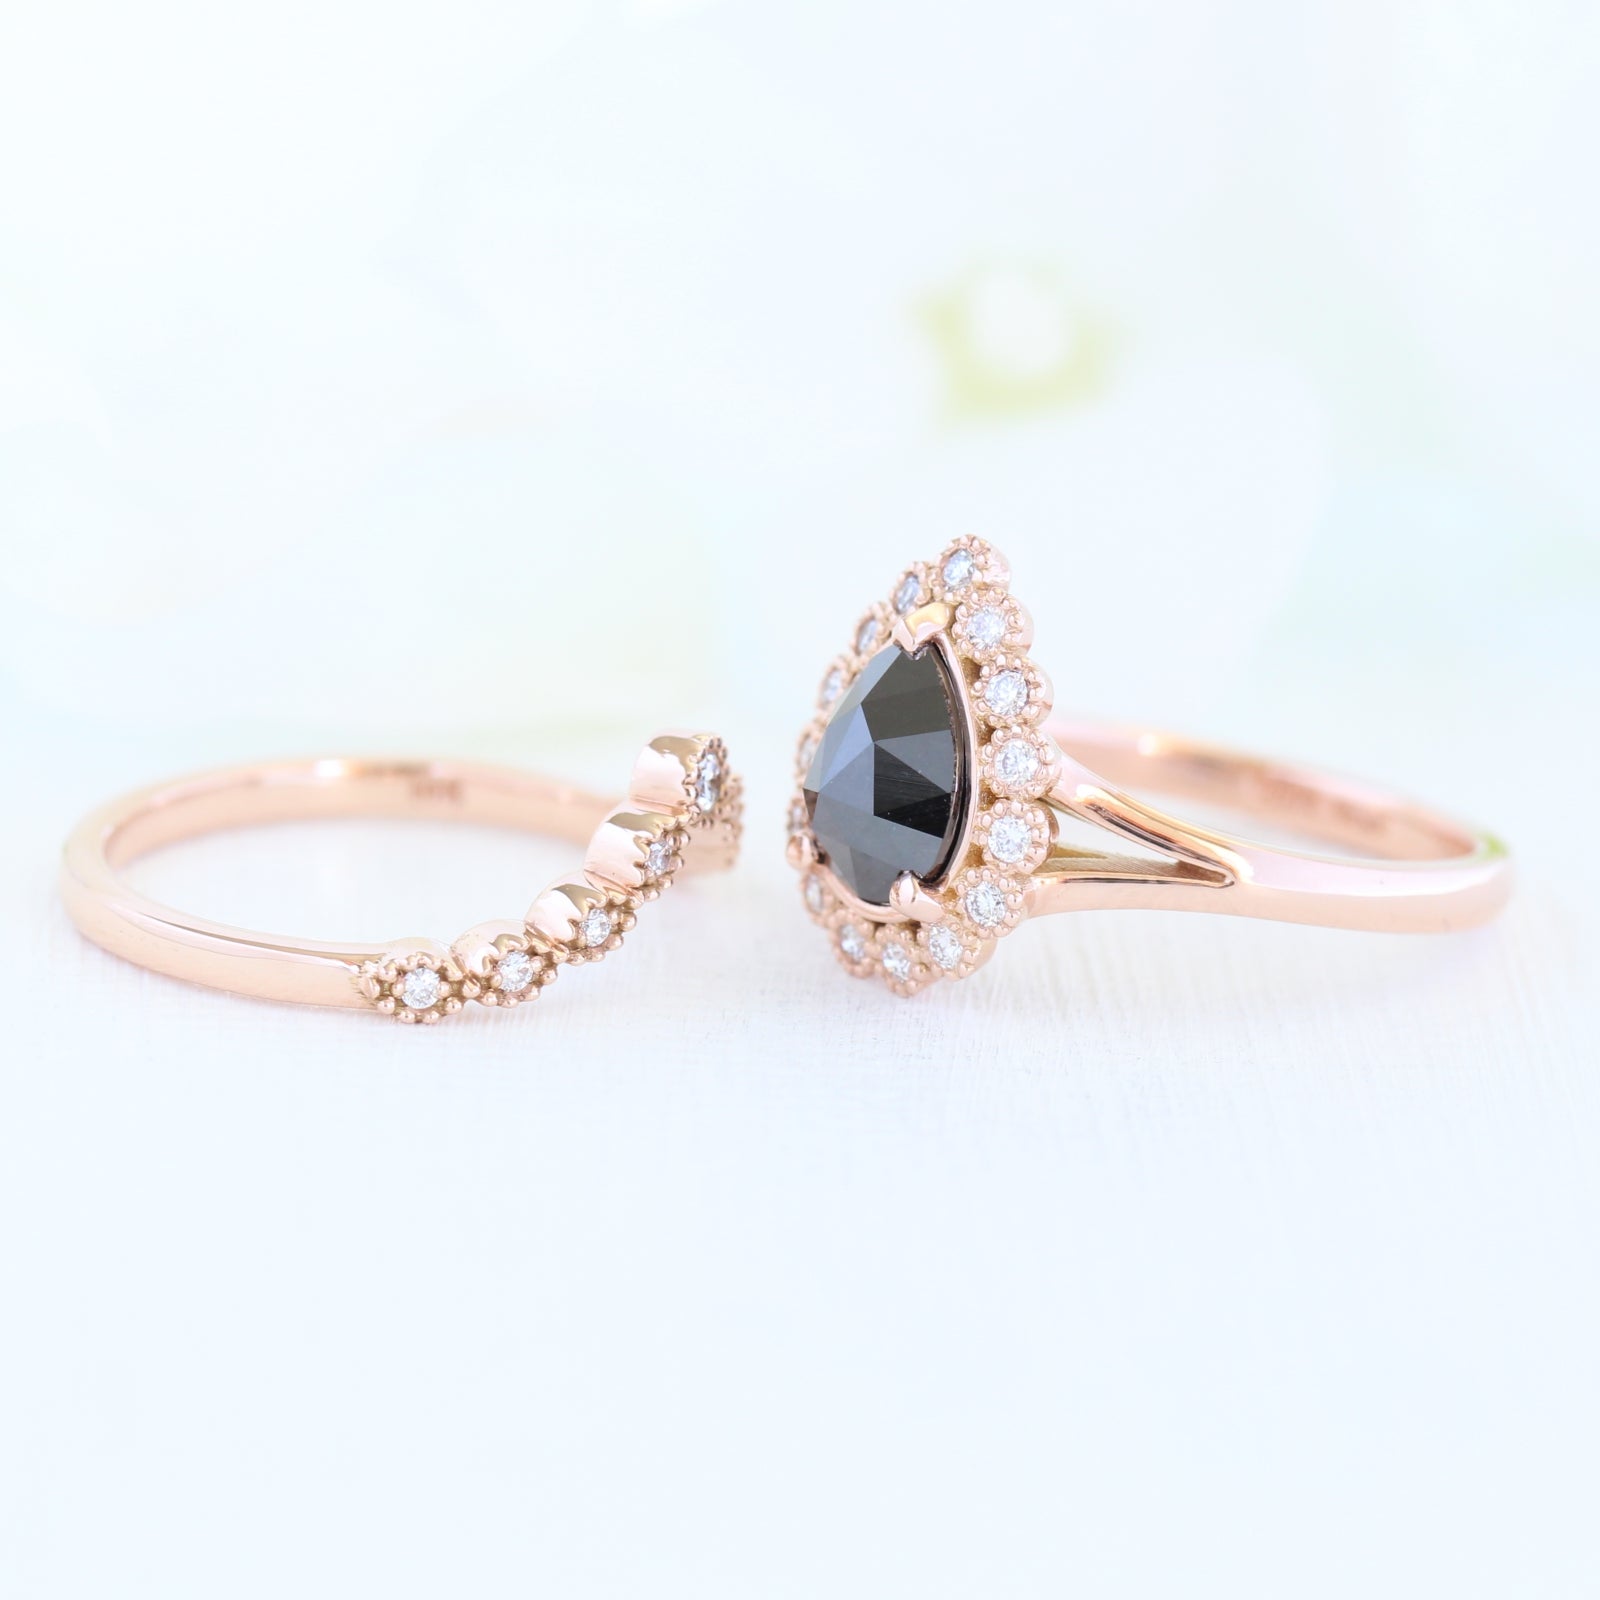 pear rose cut black diamond ring rose gold and curved diamond wedding ring set by la more design